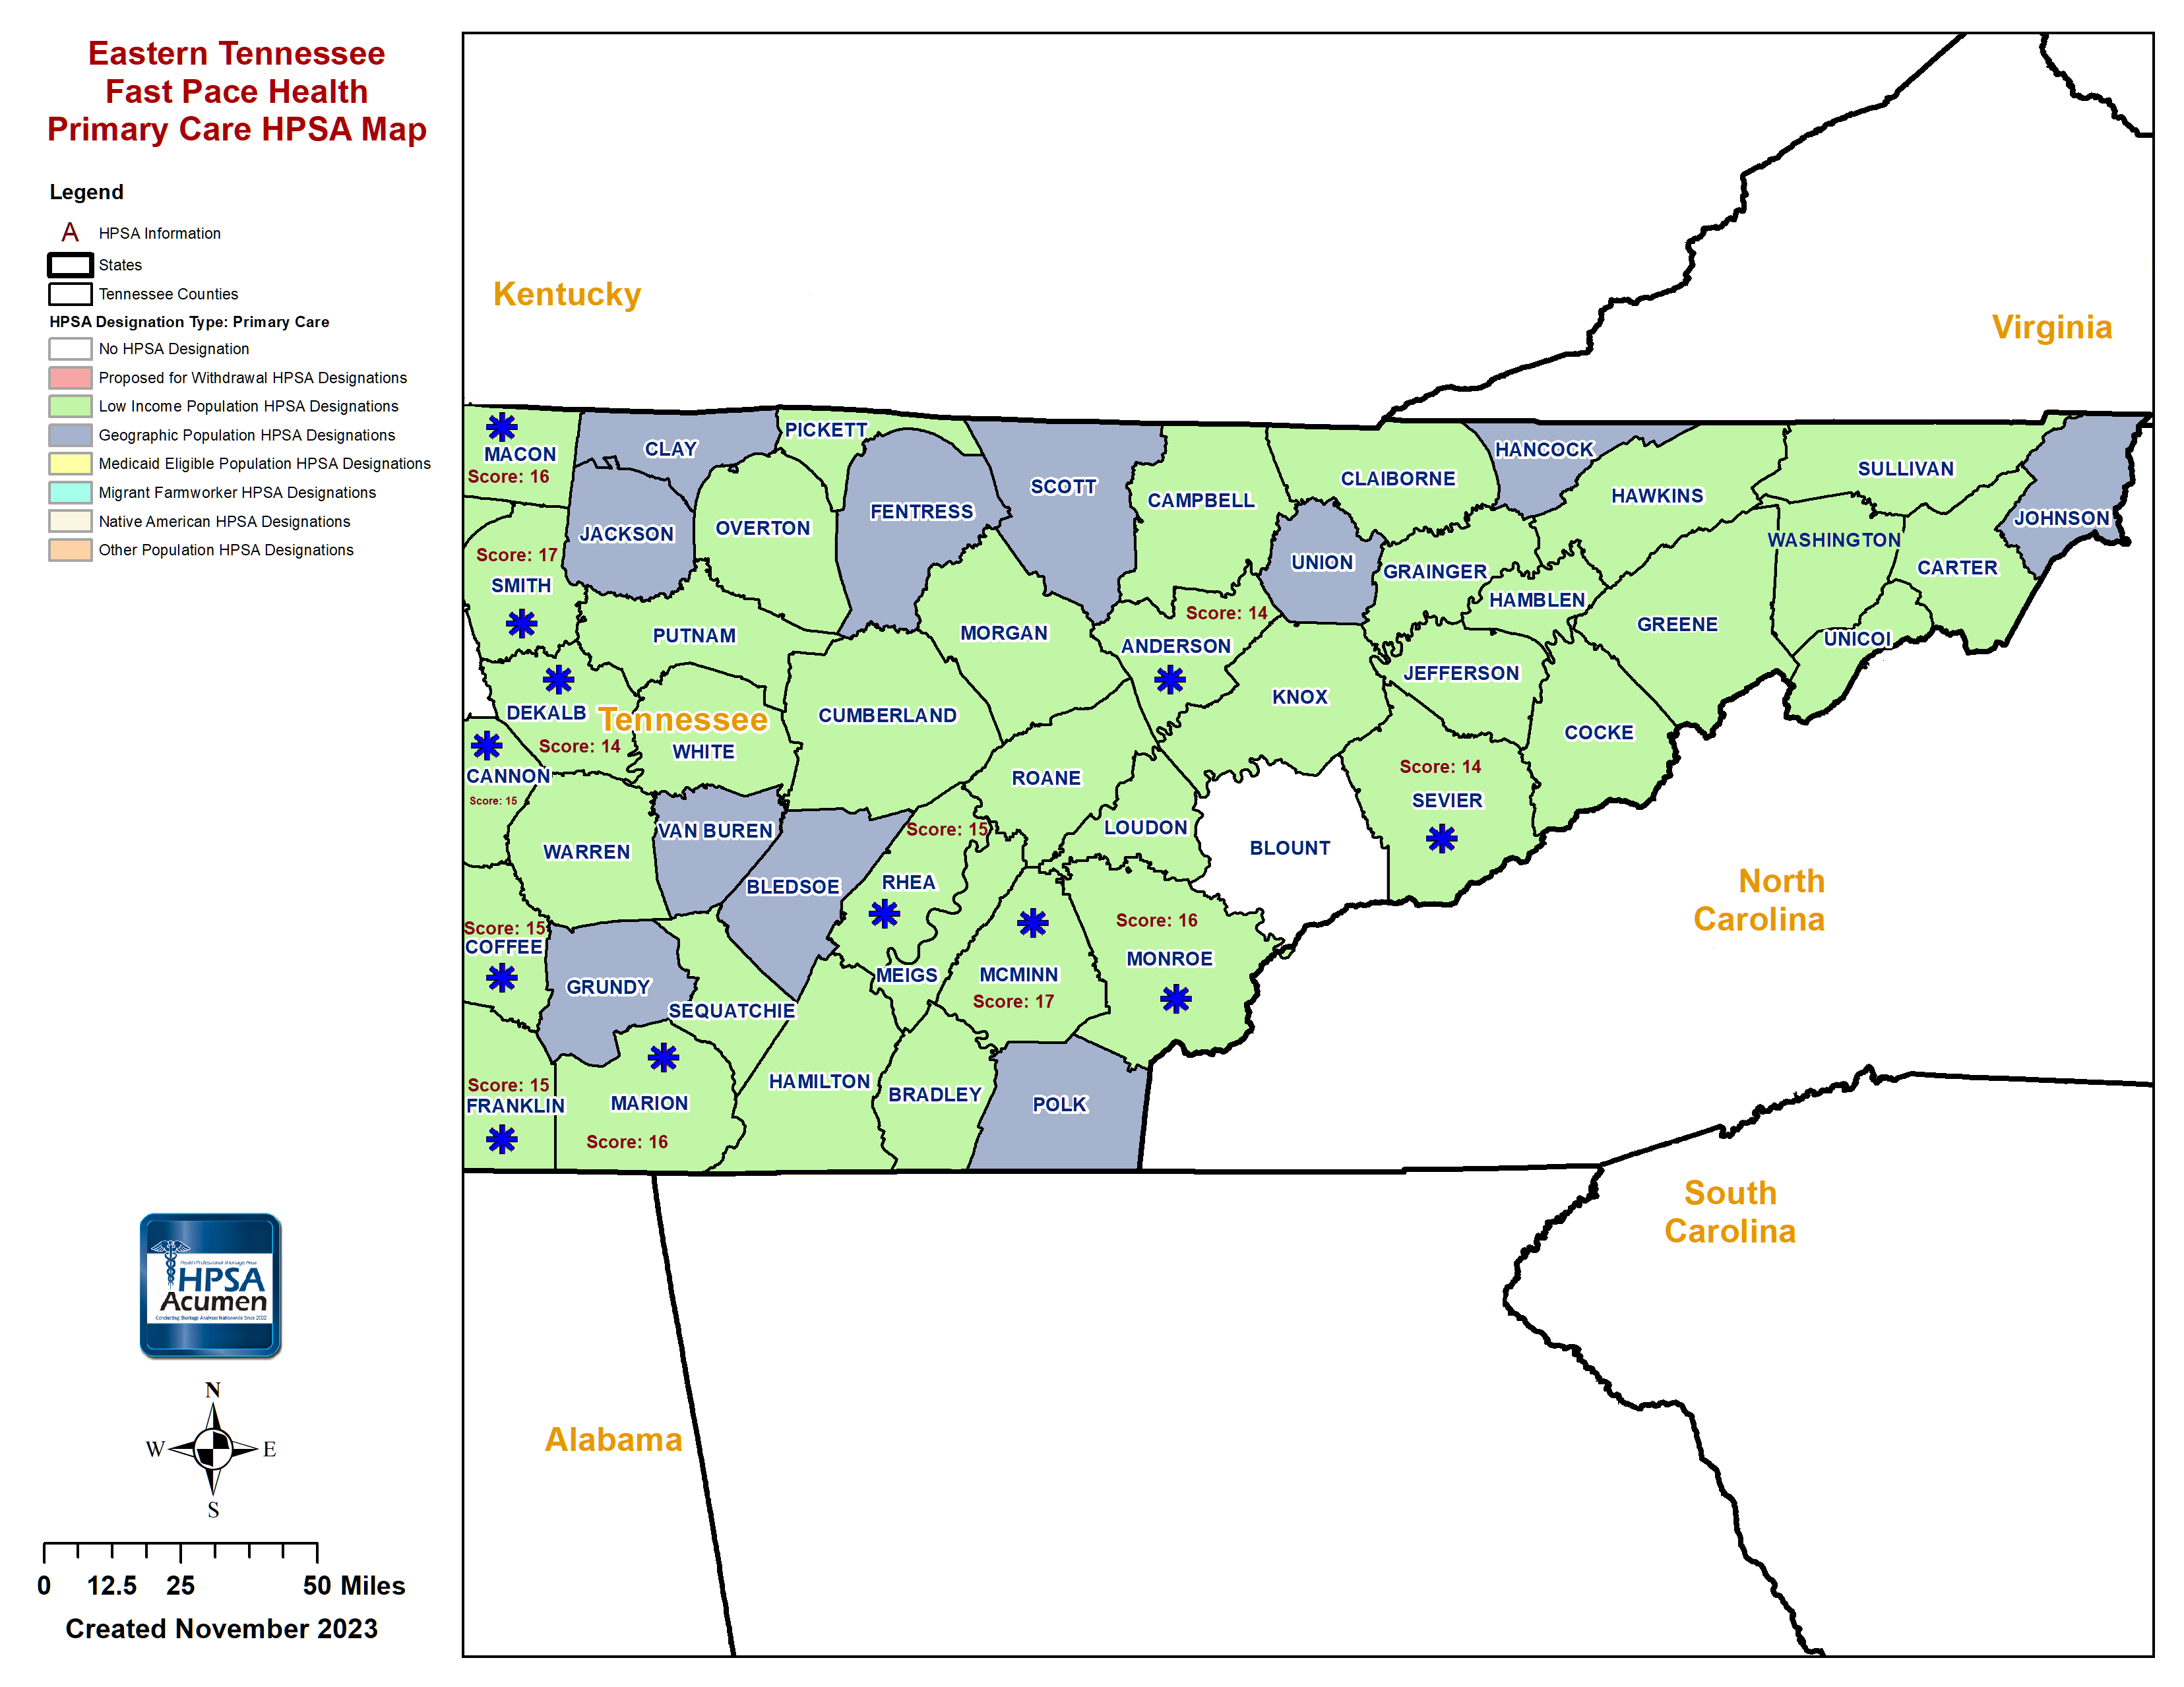 Fast Pace Health Eastern Tennessee PC HPSA Map